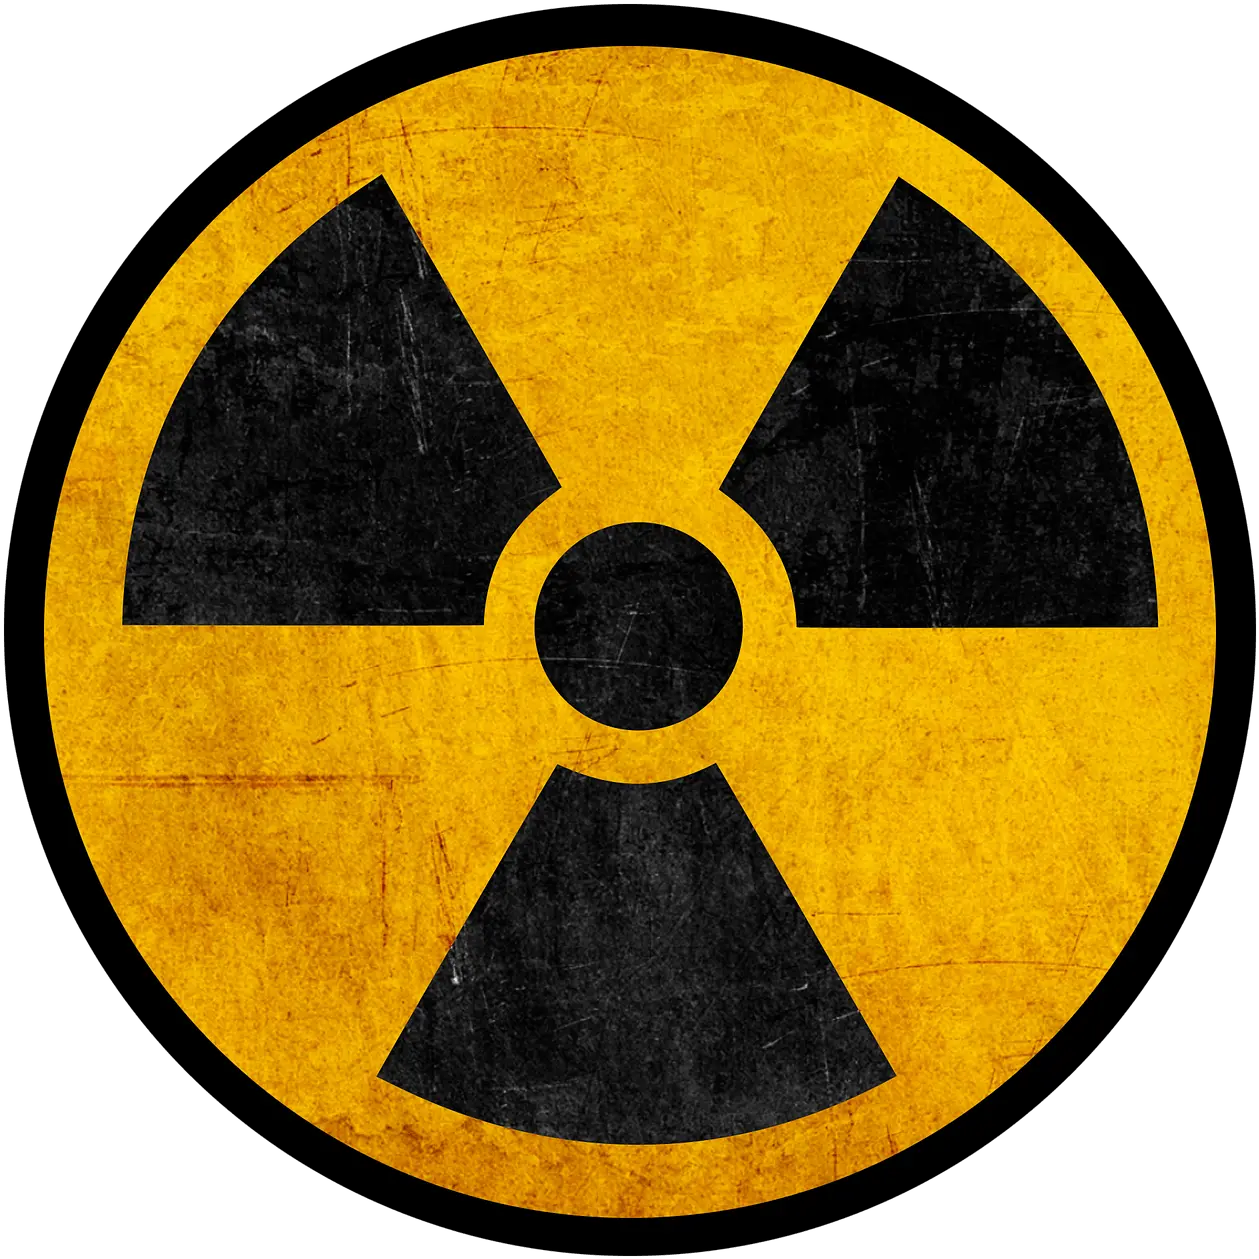 Hazard Symbol Clipart Full Size Clipart 852048 Pinclipart Nuclear Sign Png Hazard Icon